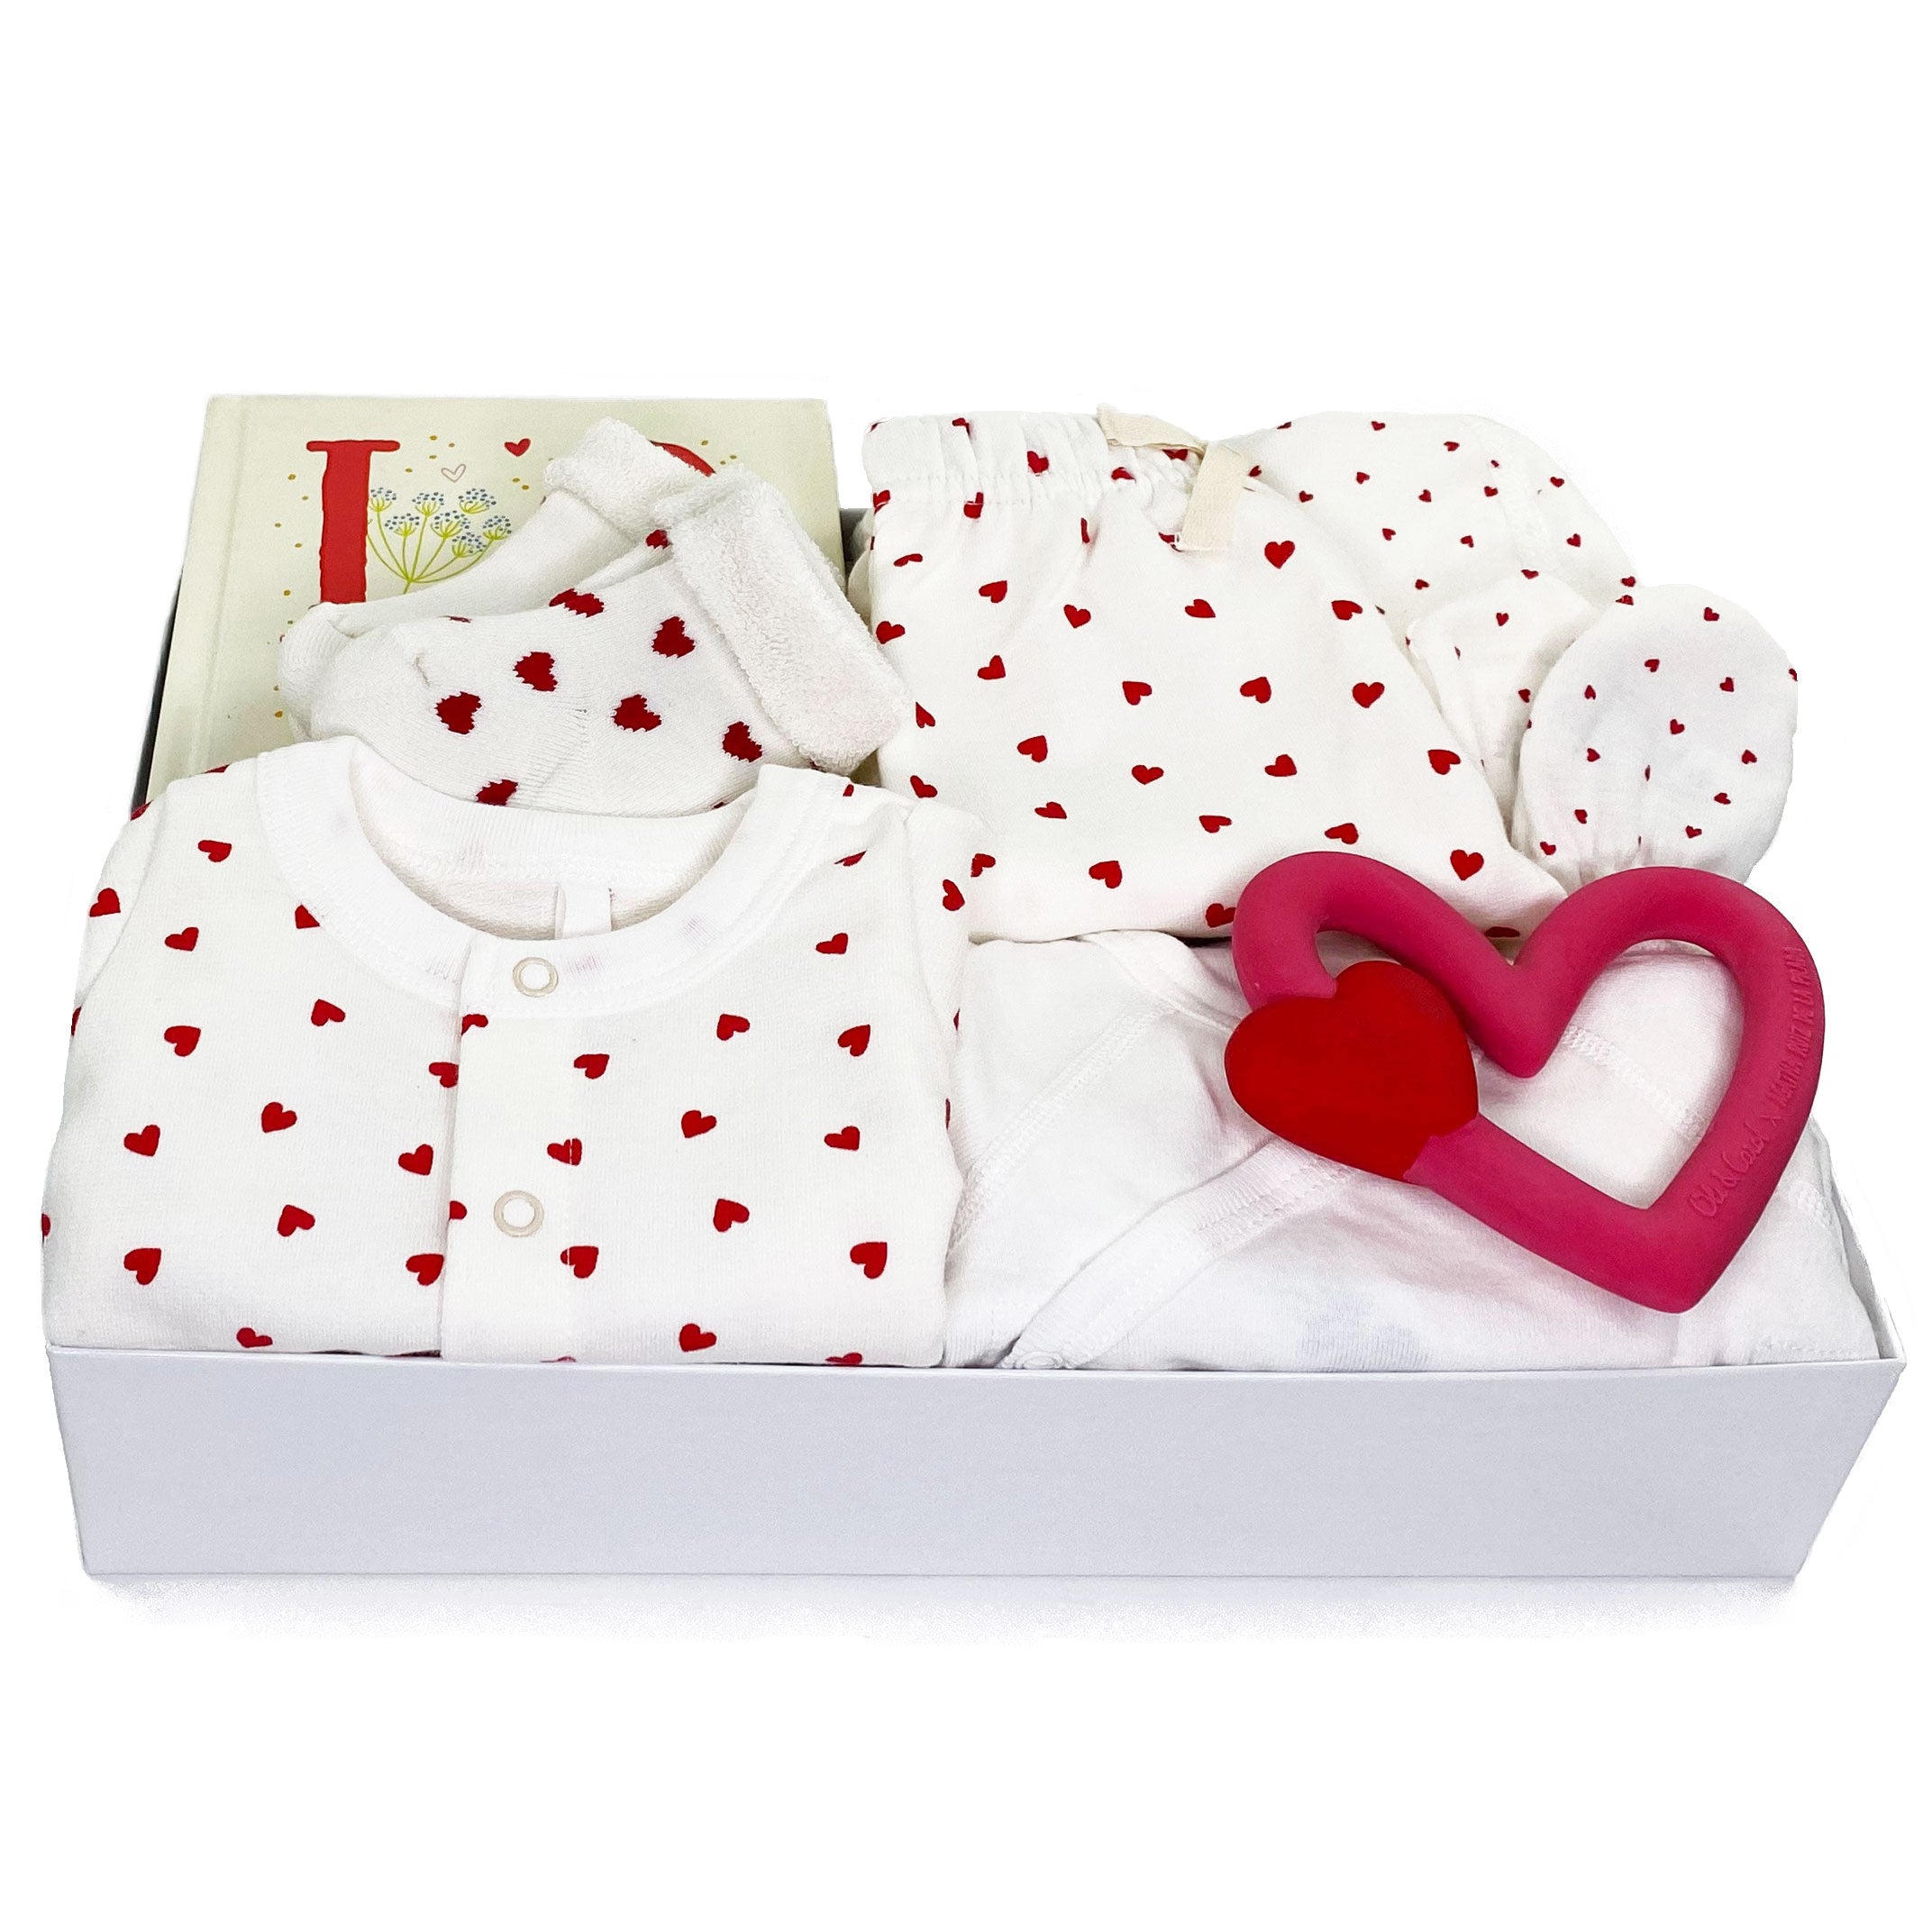 Luxury Baby Gift Box featuring Petit Bateau organic cotton gift set with hearts print and curated accessories